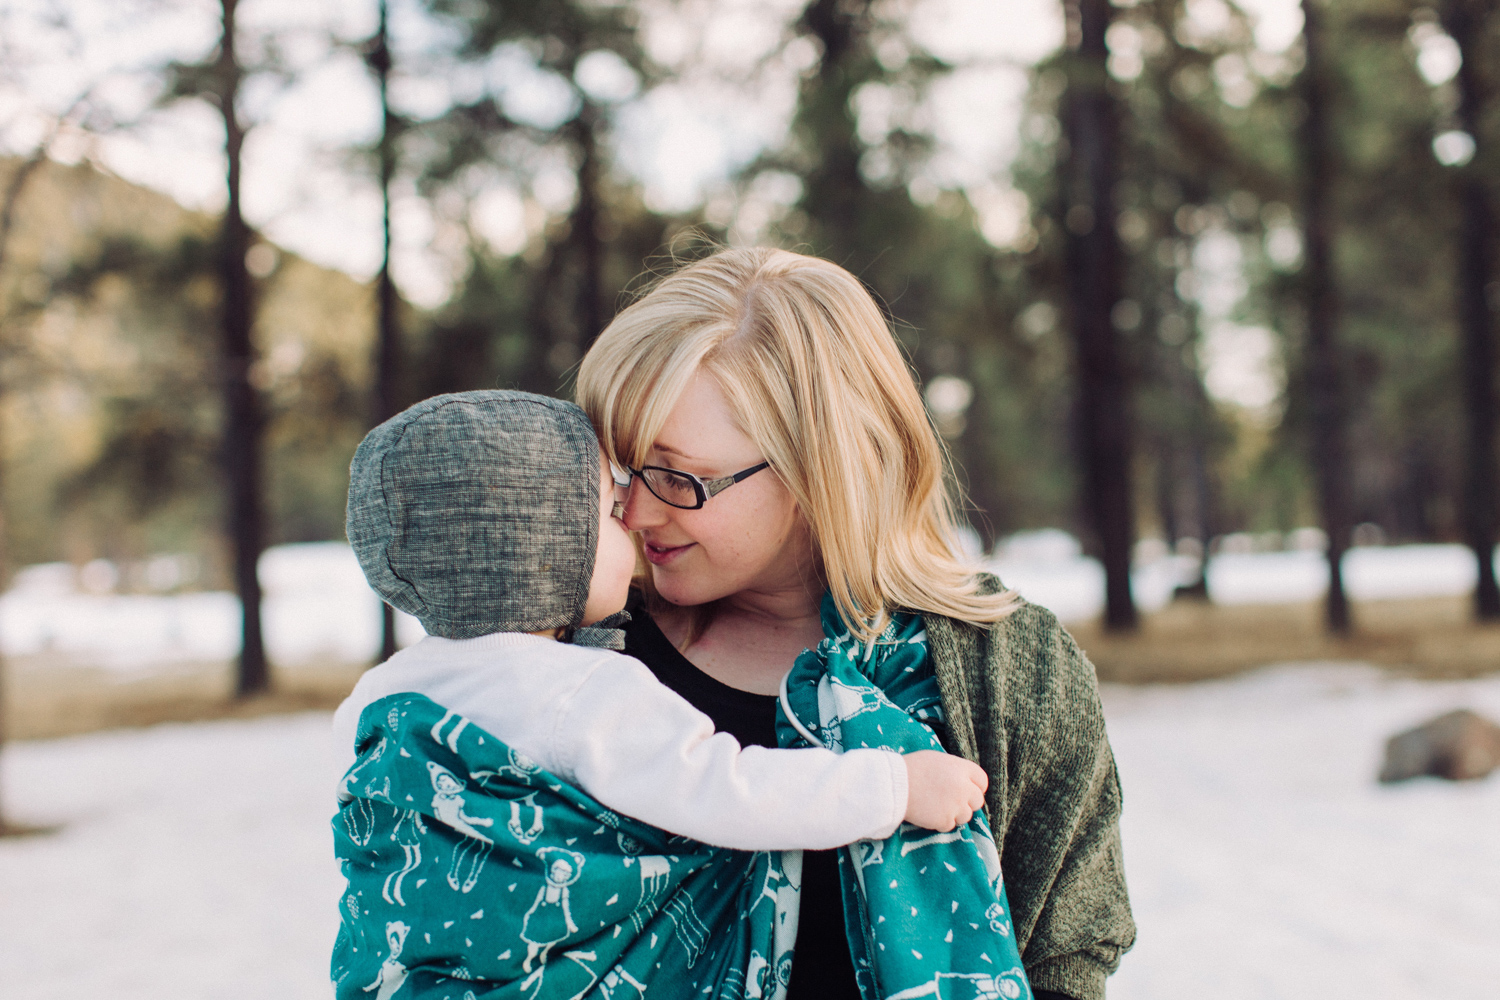 Sweet Little Toddler Snow Family Photography